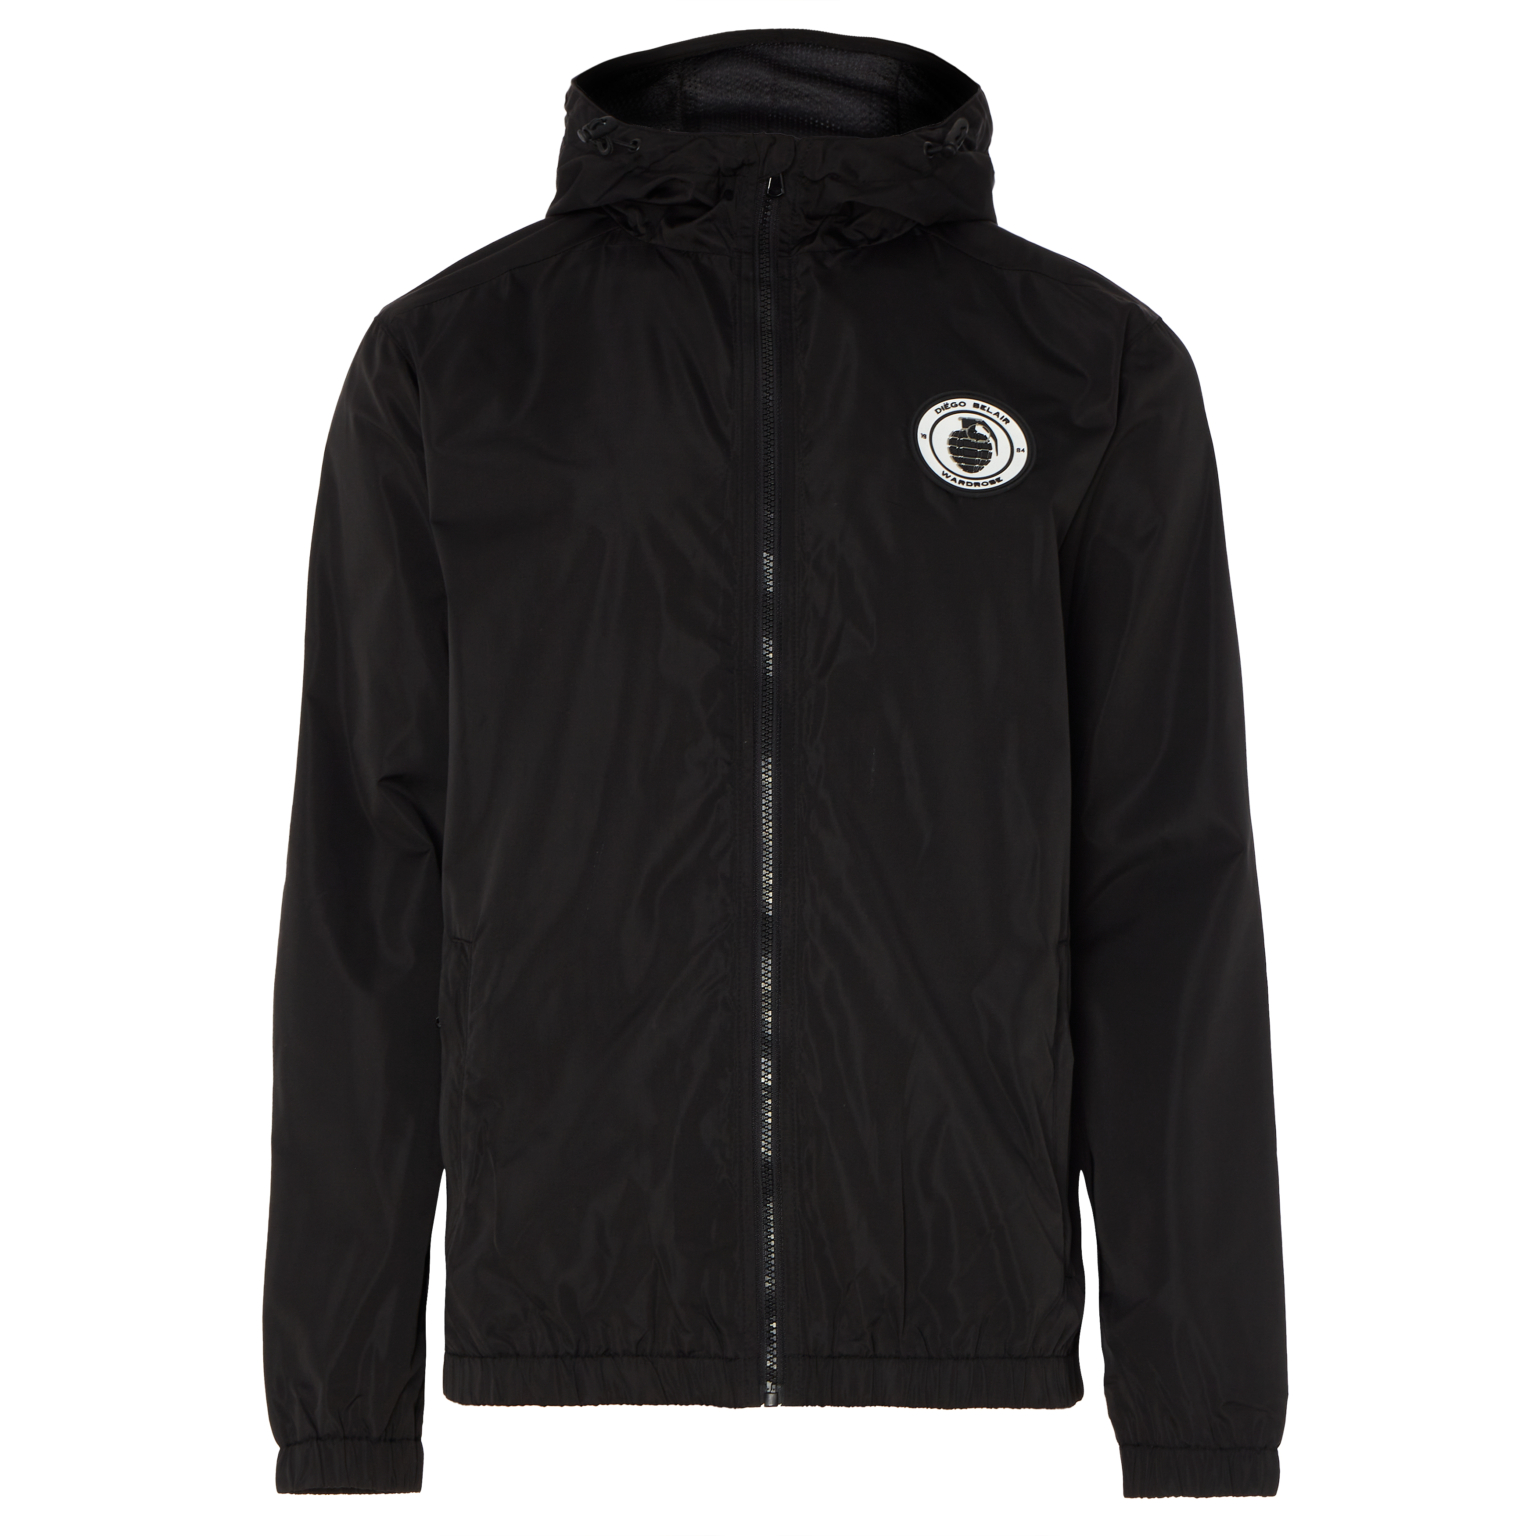 Front view of black Diego Belair jacket with logo on chest